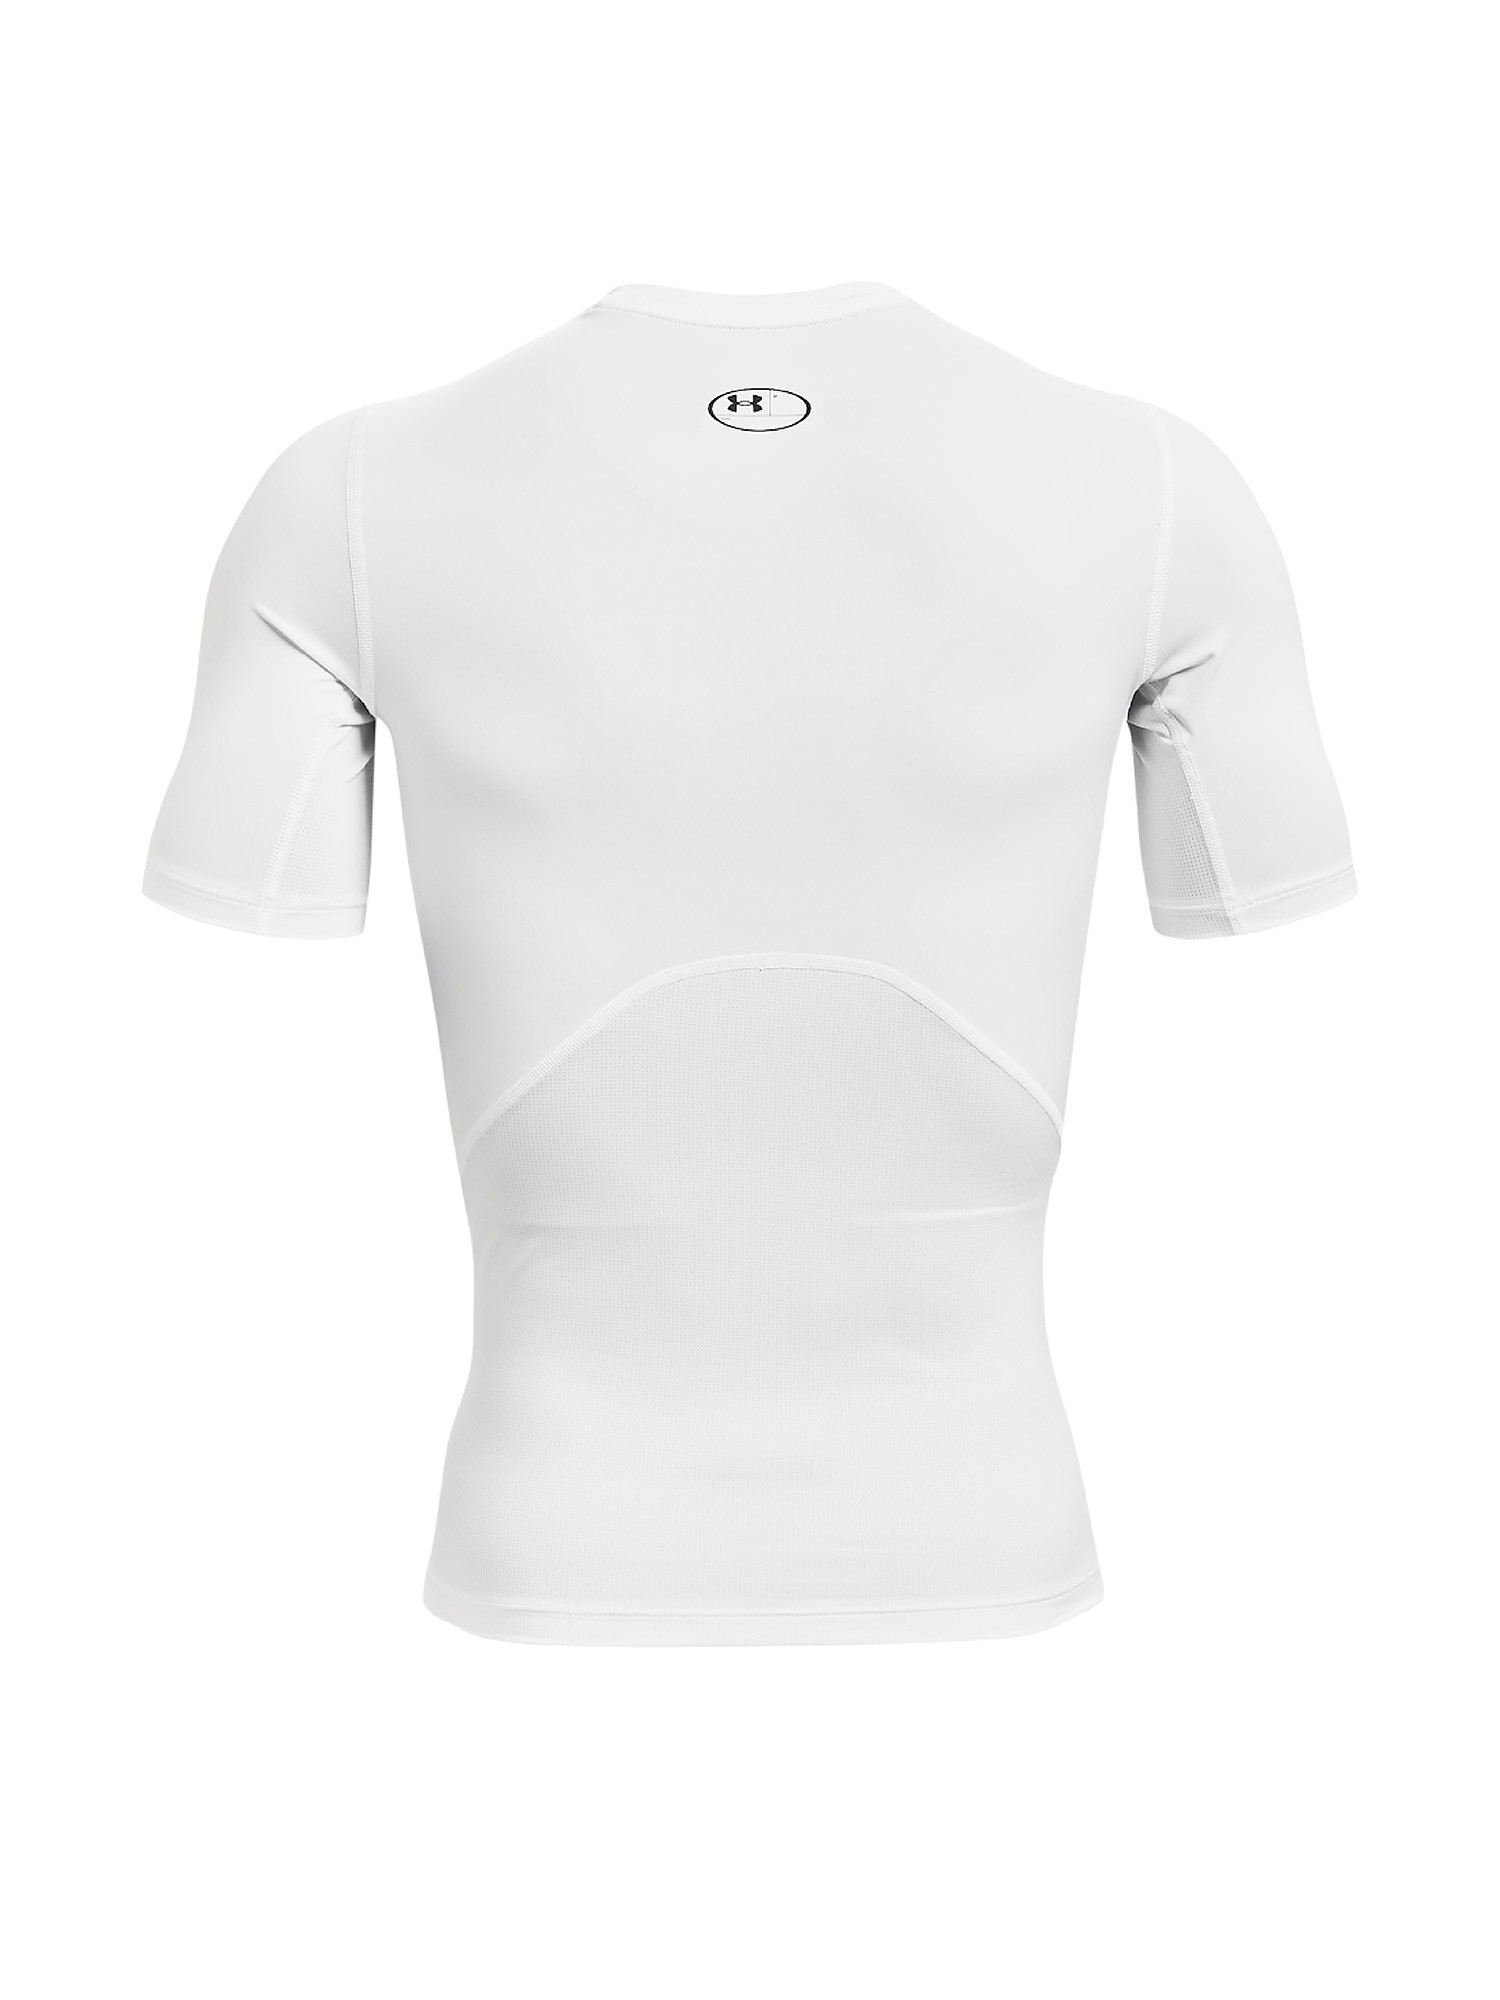 Under Armour - HeatGear® Armor Short Sleeve Jersey, White, large image number 1